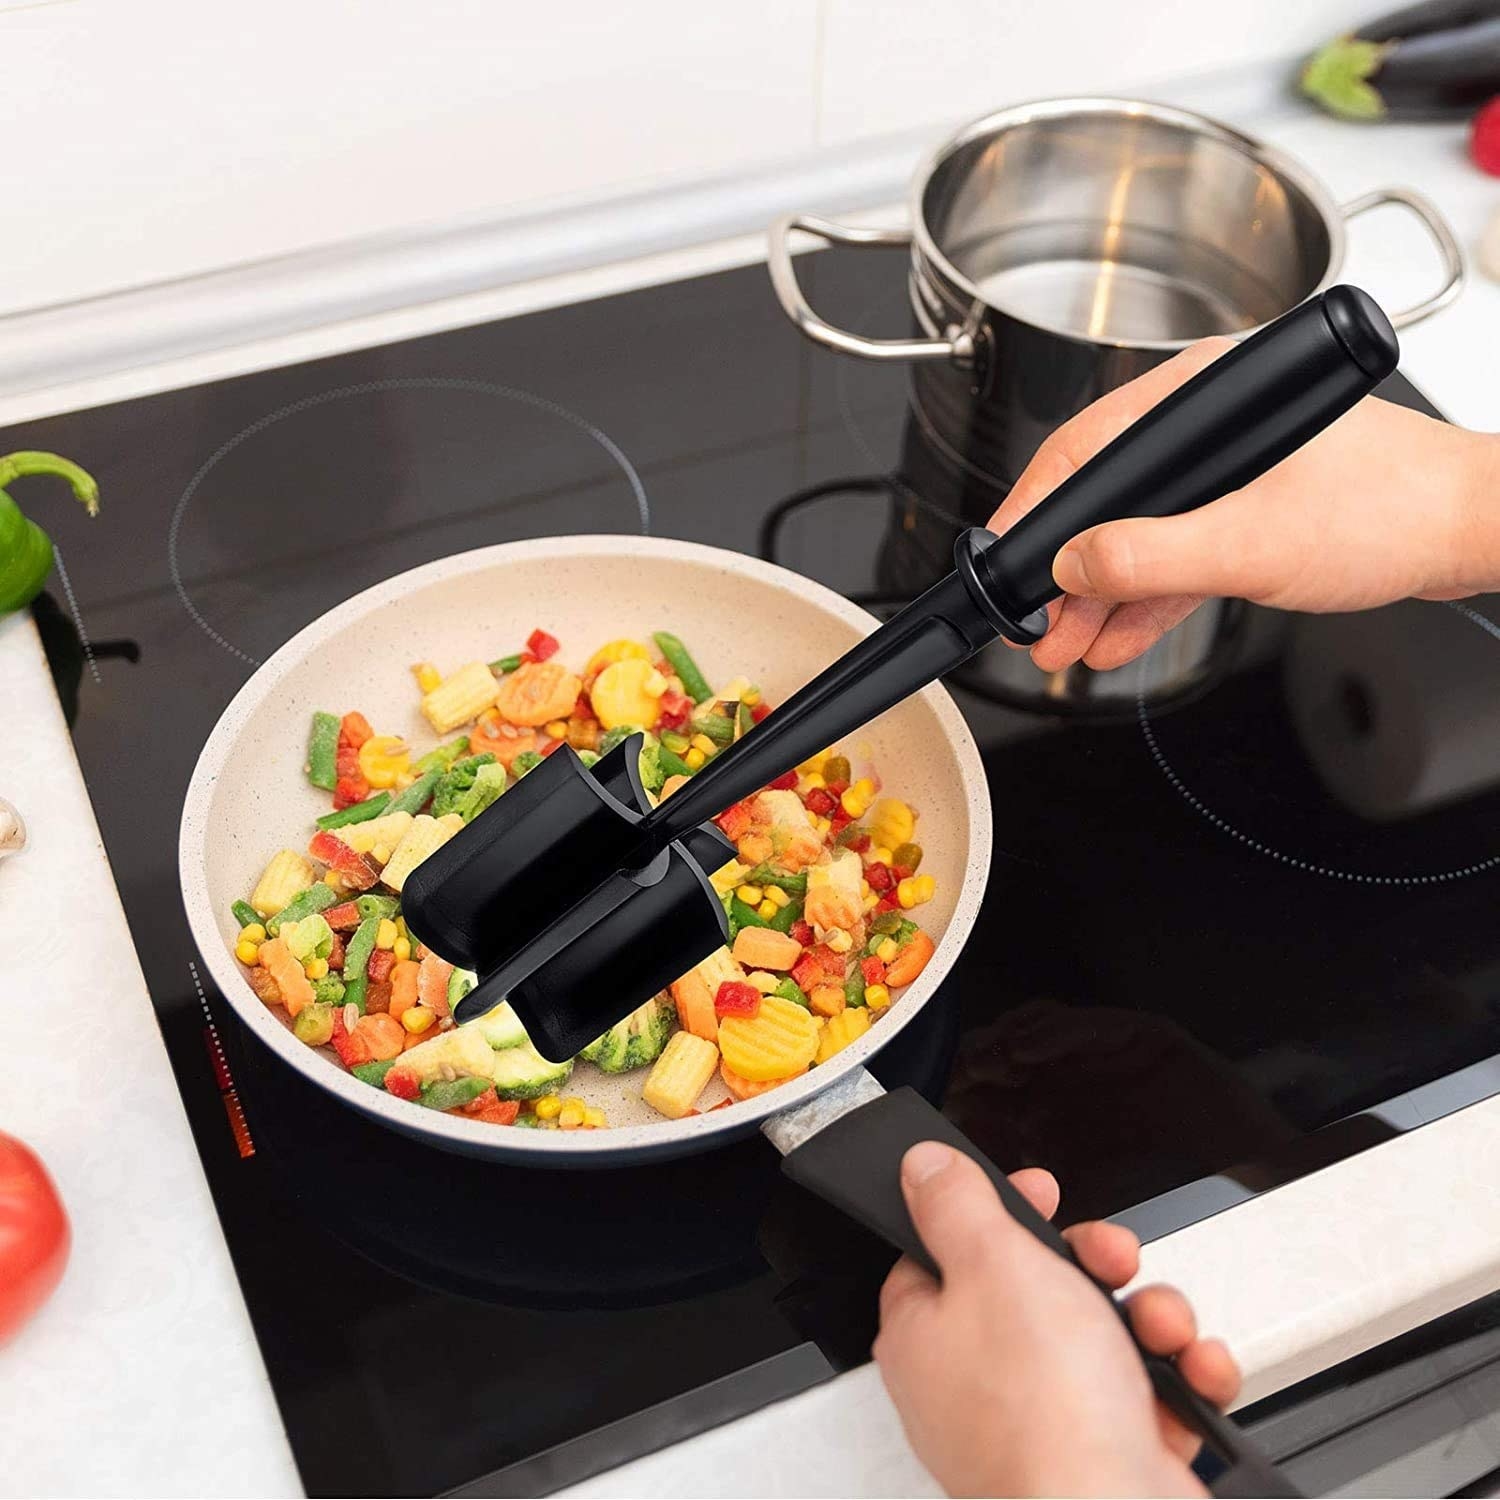 a person using the masher in a pan full of vegetables